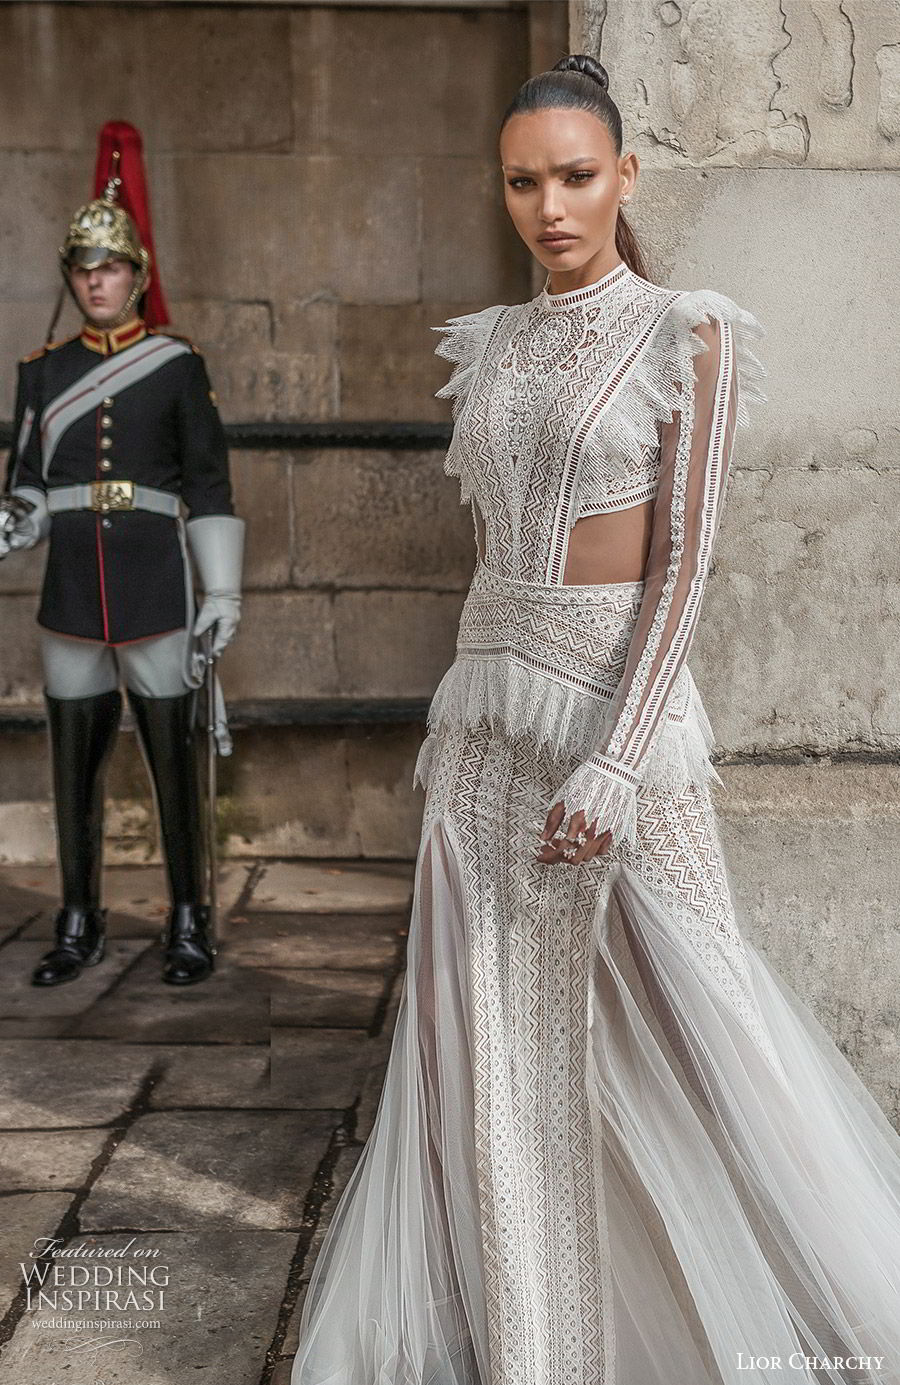 lior charchy 2019 bridal illusion long sleeves high neckline fully embellished side cutouts a line fit flare wedding dress (2) lace romantic boho chic moden mv